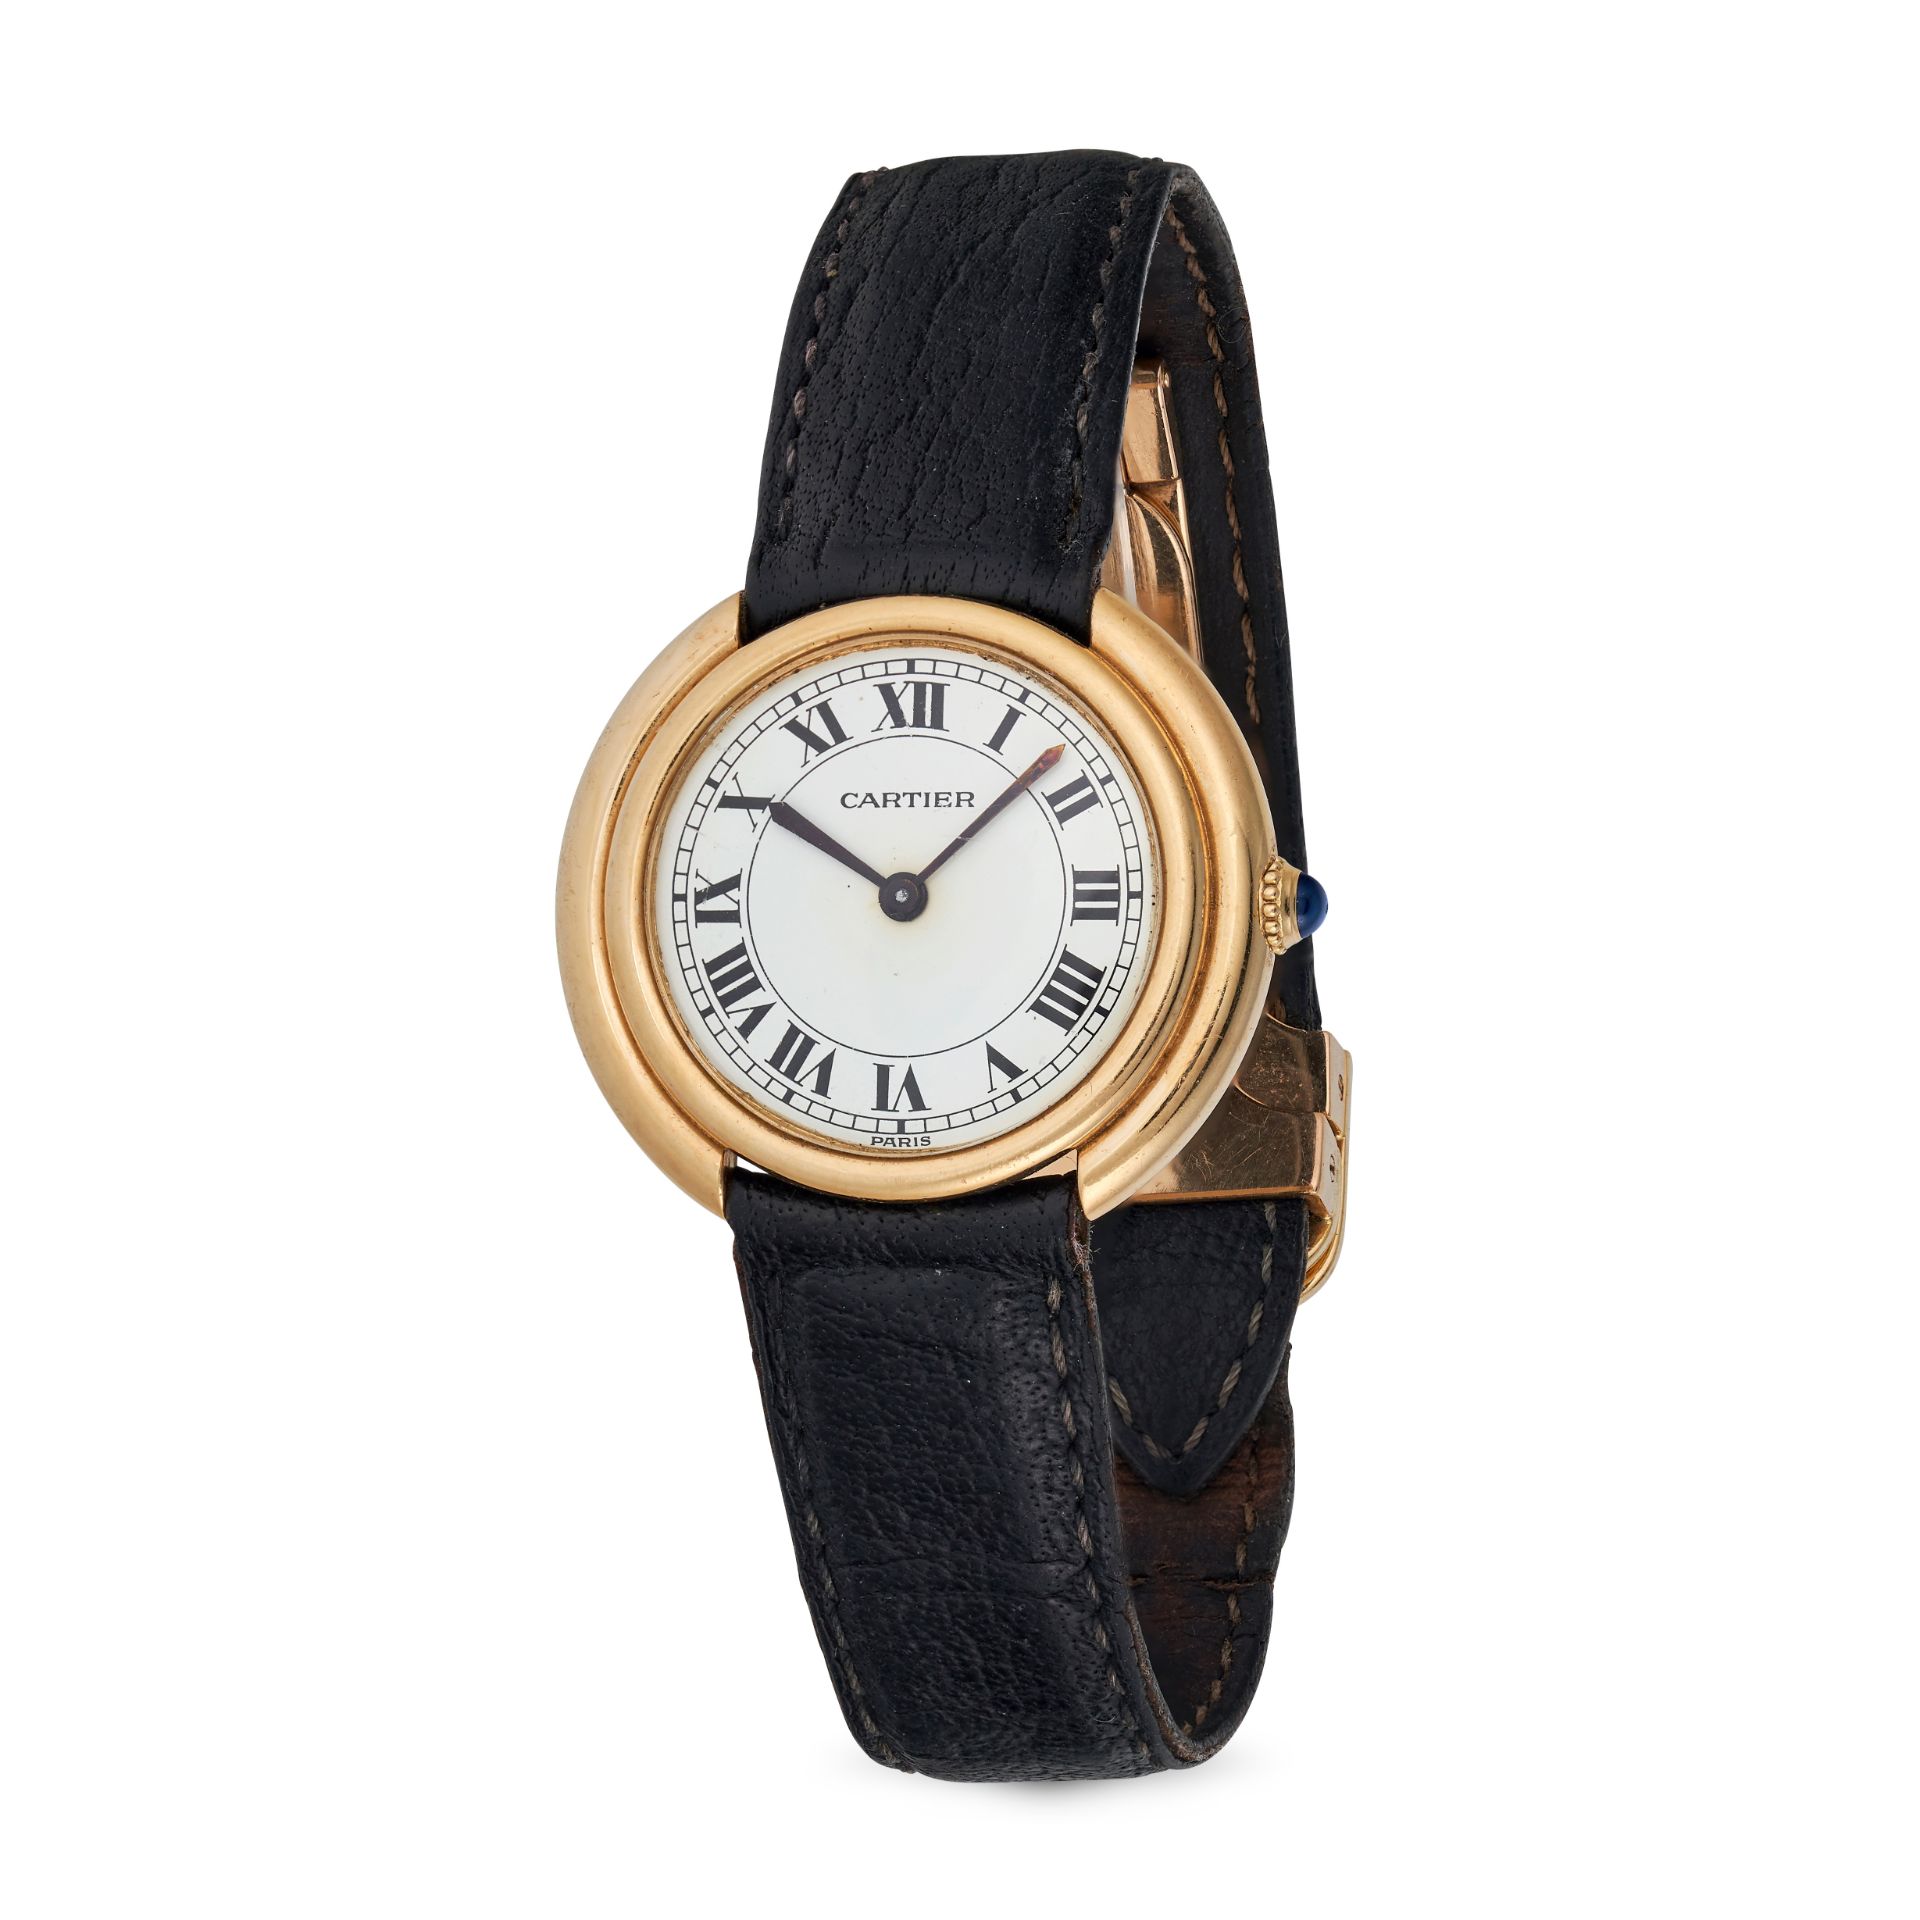 CARTIER - A CARTIER PARIS VENDOME RONDE AUTOMATIC WRISTWATCH in 18ct yellow gold, 170030484, the ...